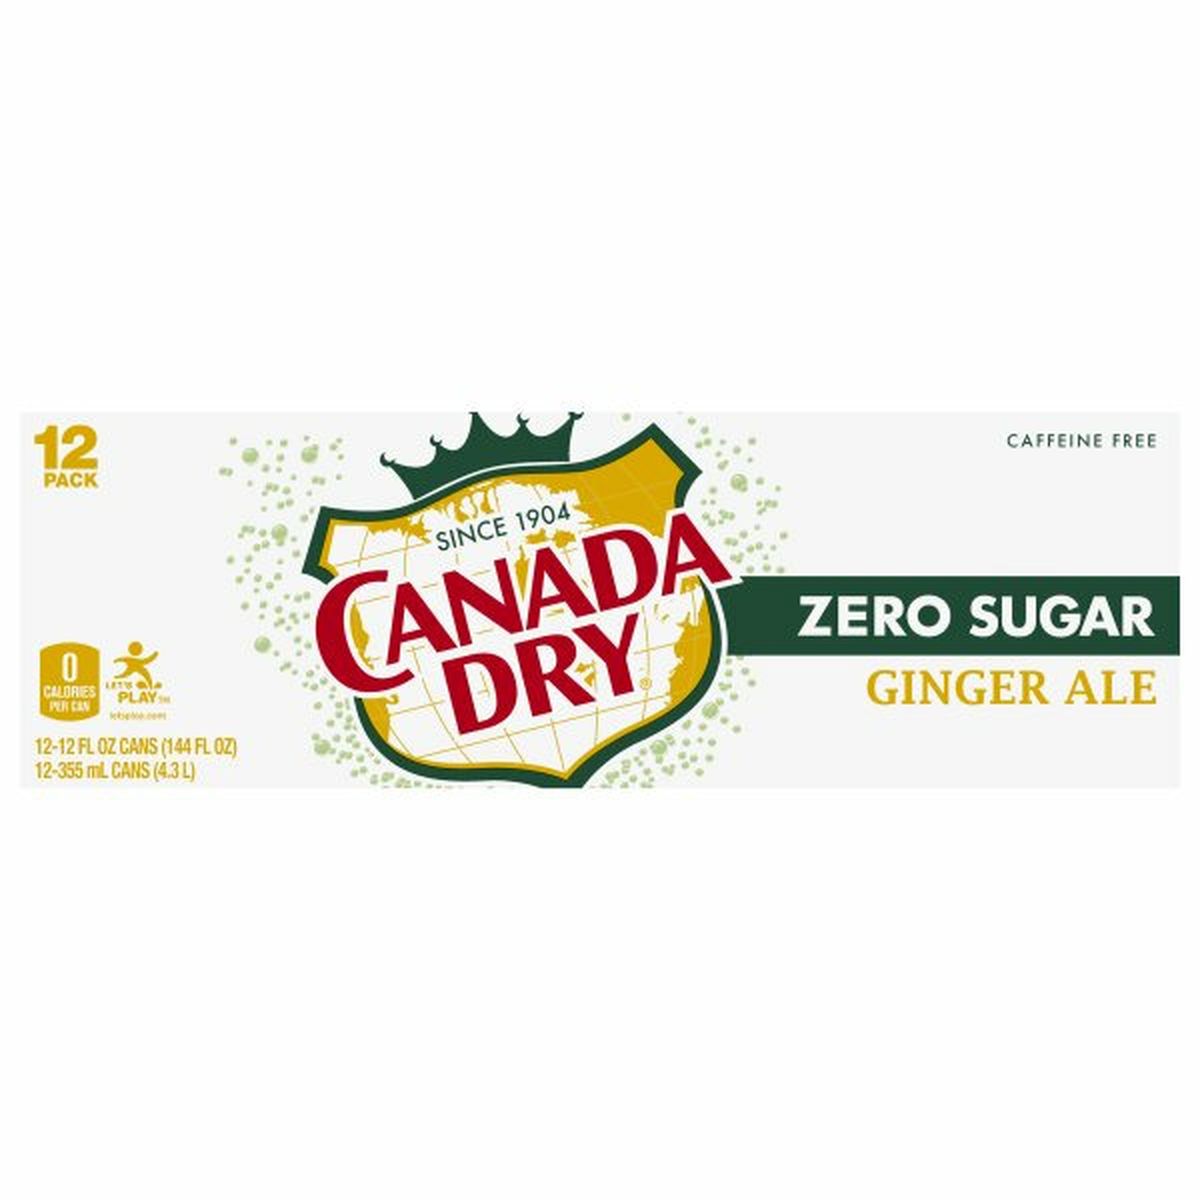 Calories in Canada Dry Diet Canada Dry Ginger Ale Ginger Ale, Diet, 12 Pack